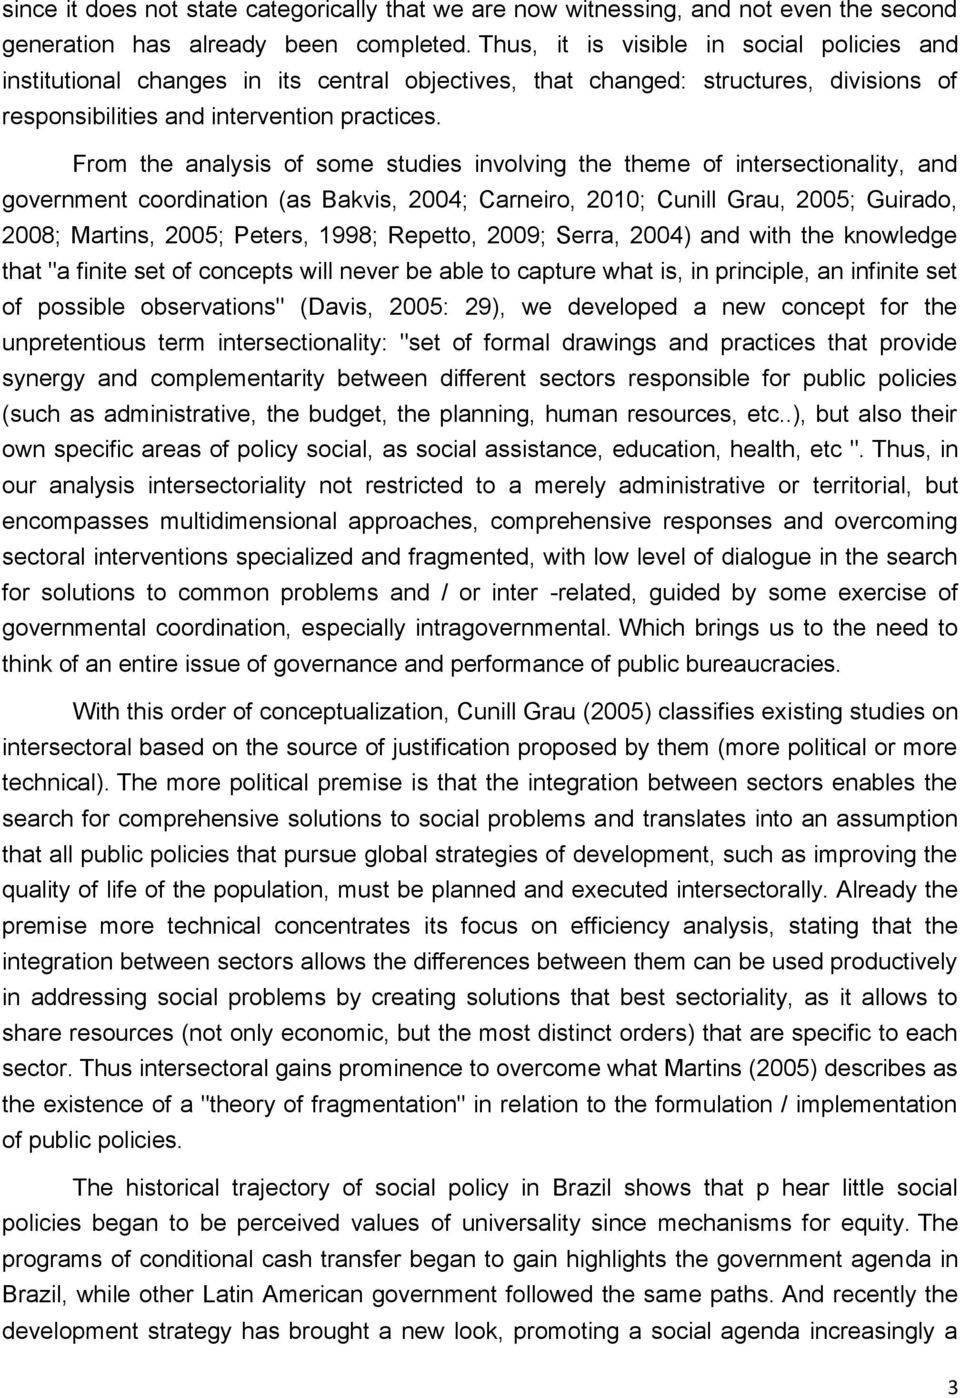 From the analysis of some studies involving the theme of intersectionality, and government coordination (as Bakvis, 2004; Carneiro, 2010; Cunill Grau, 2005; Guirado, 2008; Martins, 2005; Peters,